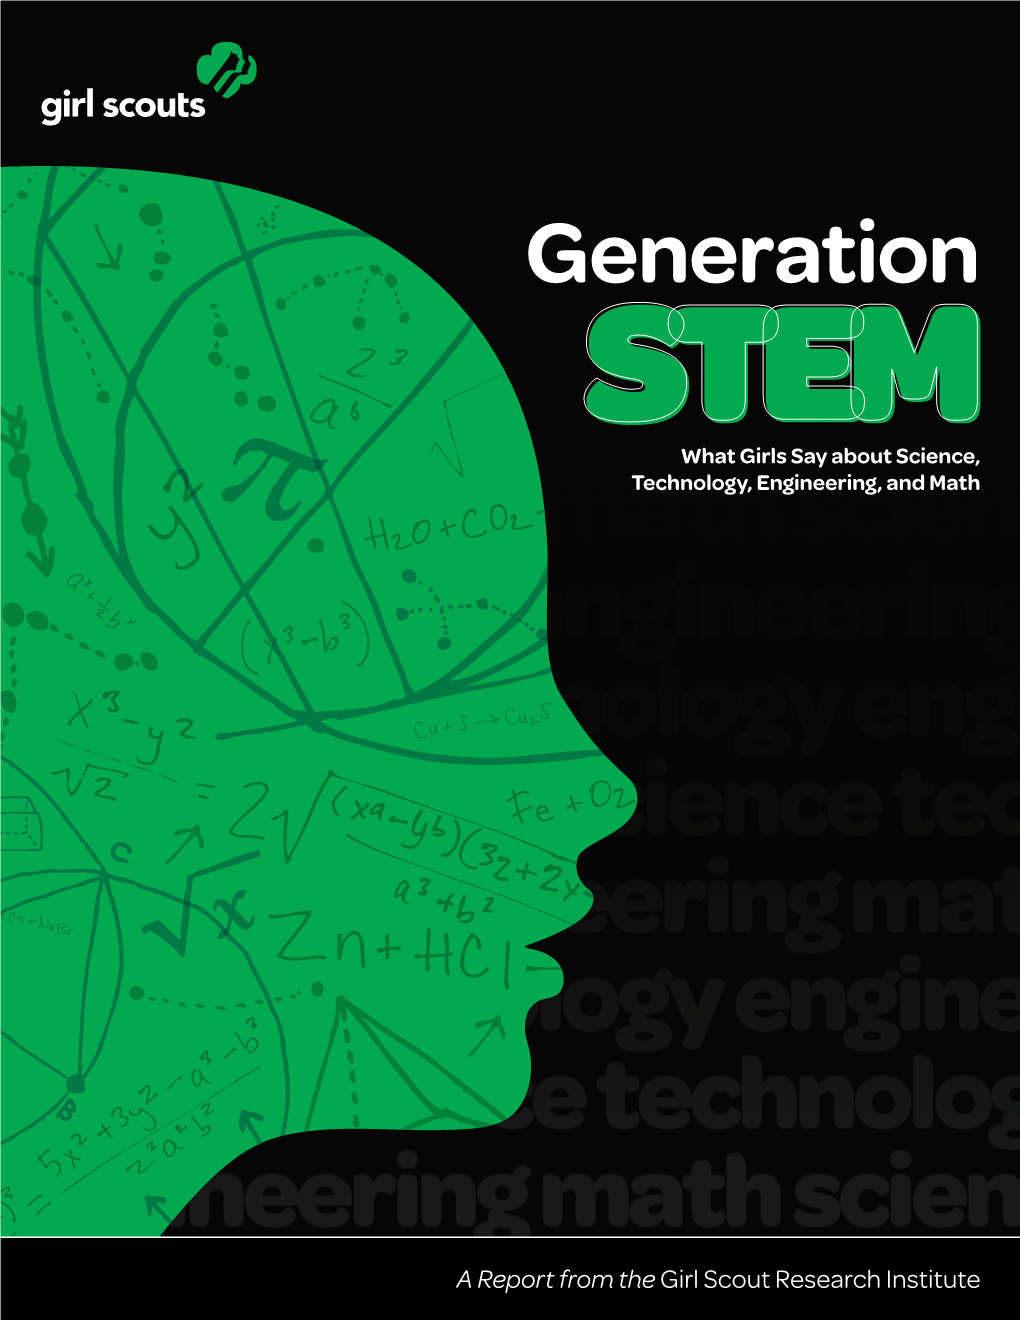 "Generation STEM" Report from the Girl Scouts Research Institute